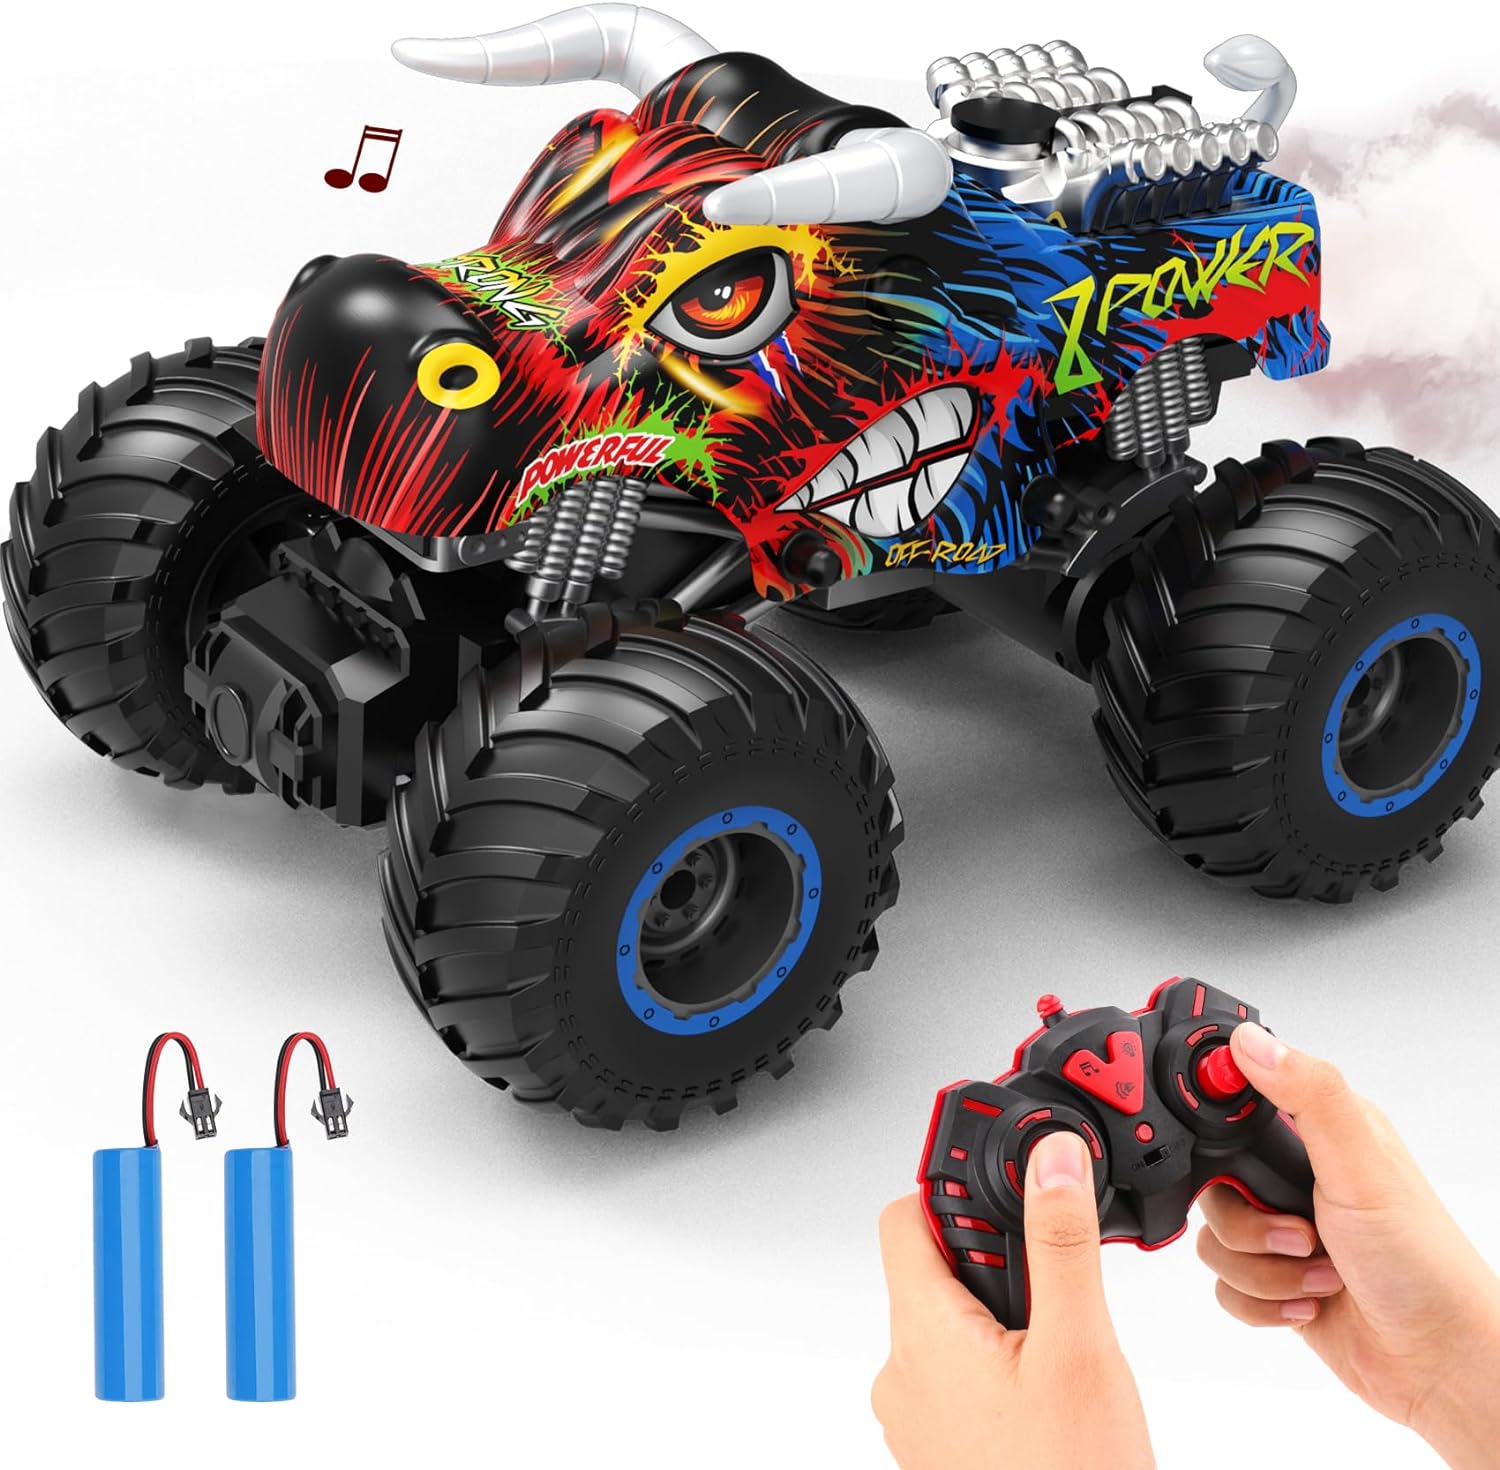 Read more about the article NEXBOX Remote Control Monster Truck Review